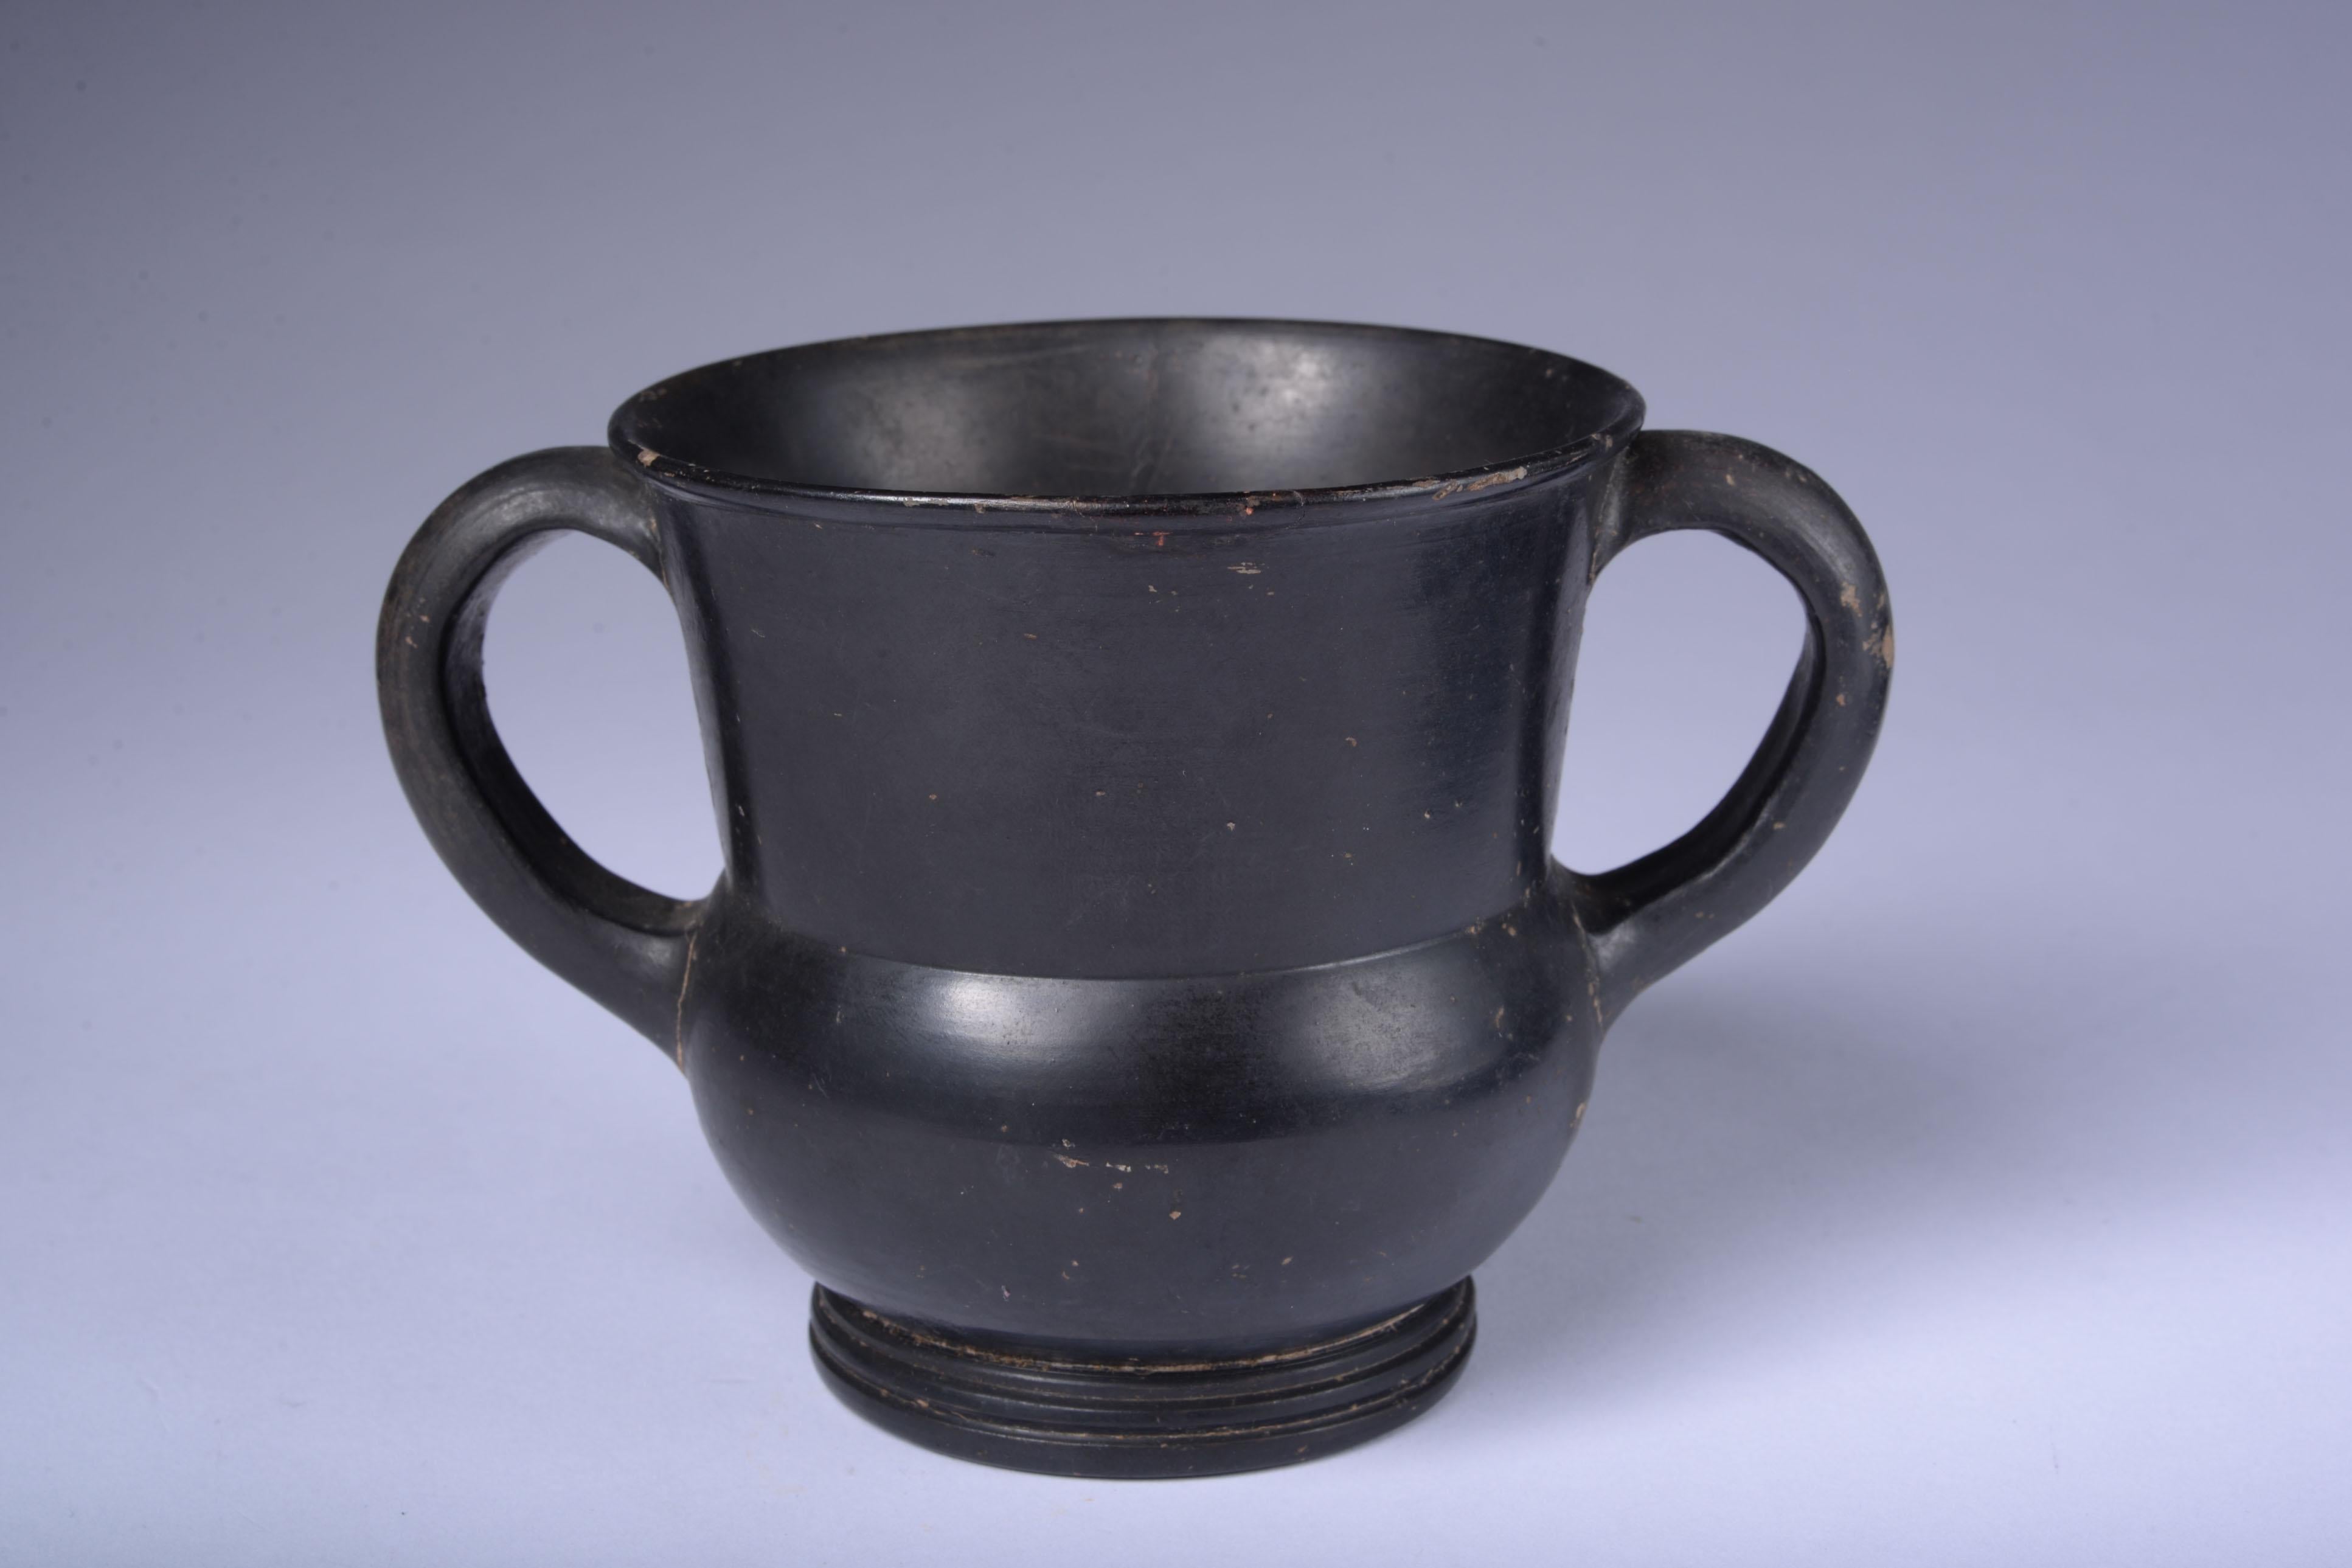 Greek Black Glaze Kantharos
Circa Early 4th Century B.C.
Terracotta
With old label reading ‘No. 133’
Height: 8.8 cm

This 4th Century B.C. kantharos is a wonderful example of the refined simplicity that characterises the artistic achievements